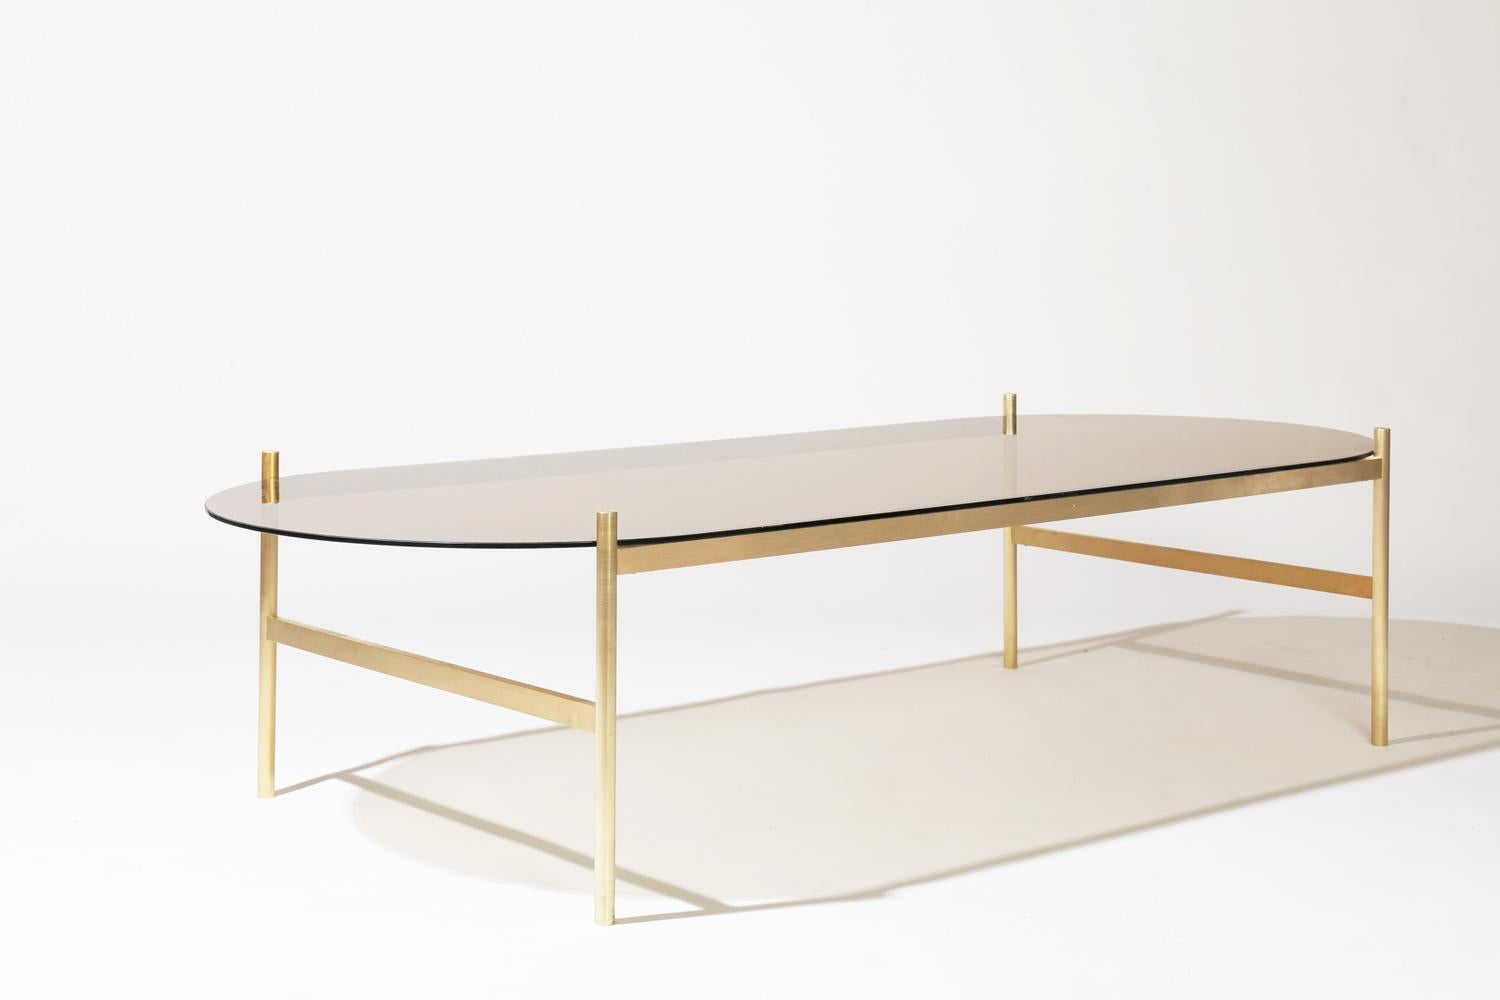 Made to order. Please allow 6 weeks for production.

Brass Frame / Bronze Glass

The Duotone coffee table is a commercial grade table made from precision machined solid brass. Each table is made locally in St. Augustine, Florida with